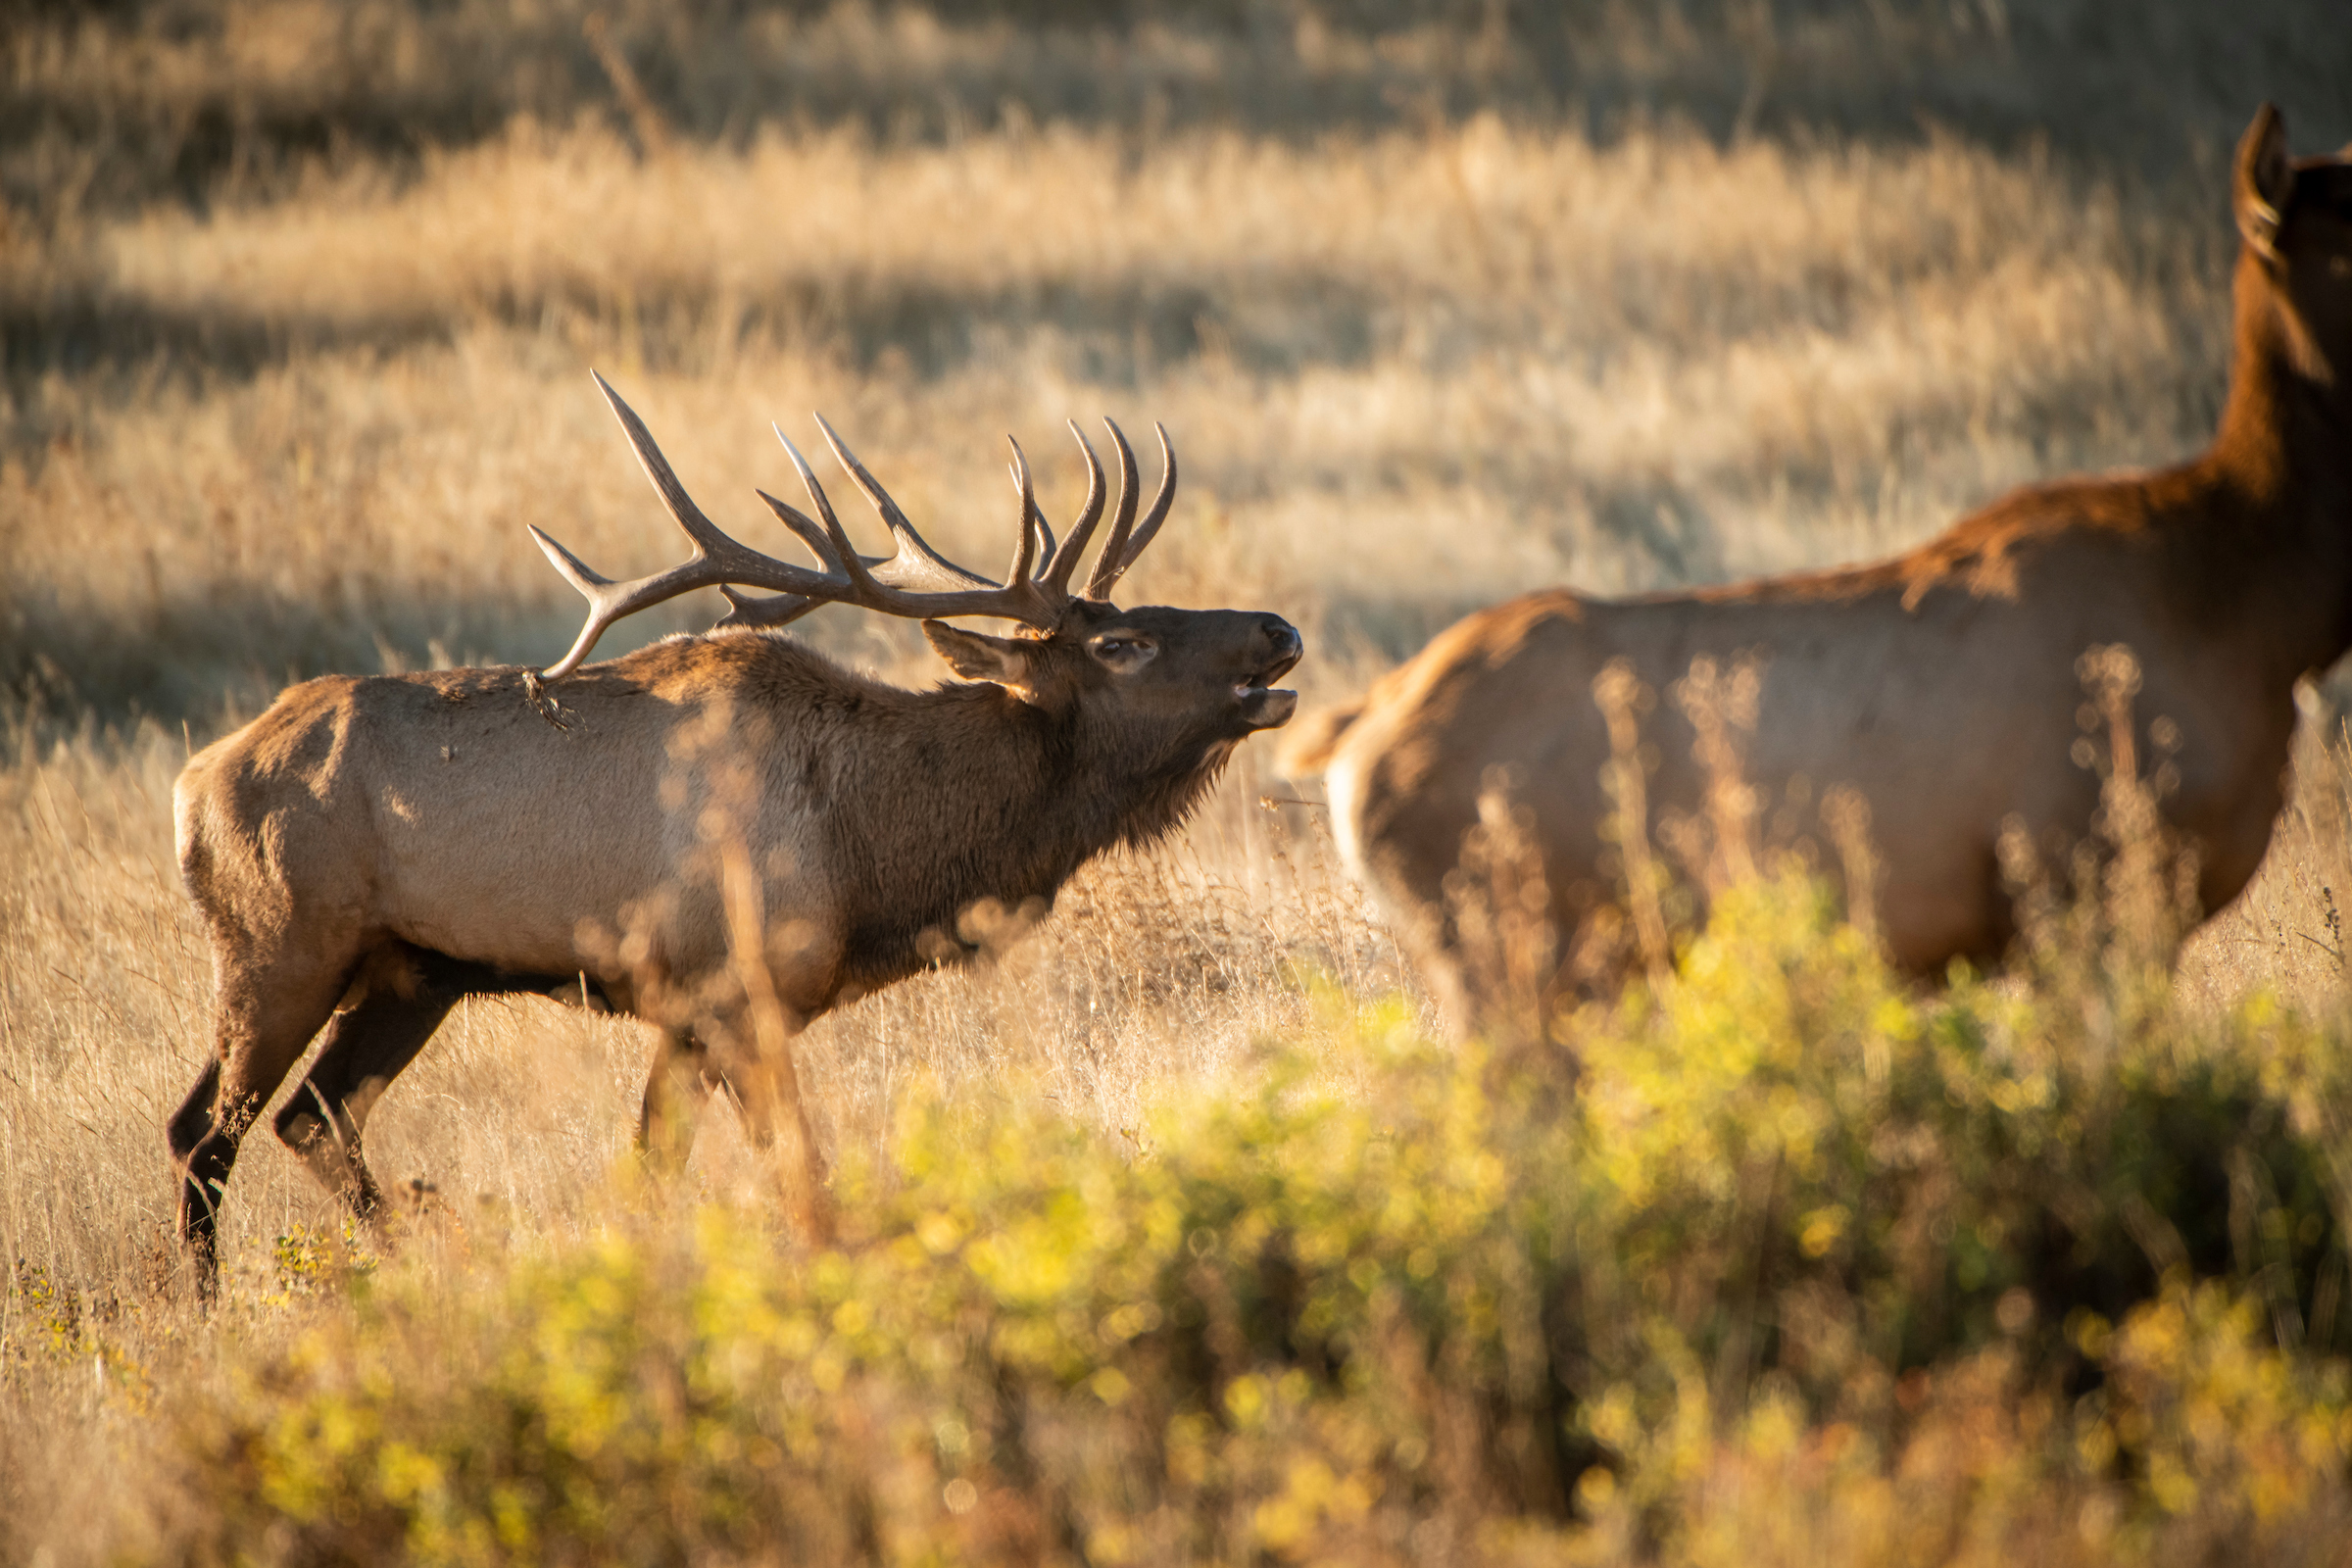 MAPLand Act Would Move Public Land Access into the Digital Age (and Make it Easier to Find Hunting Spots)